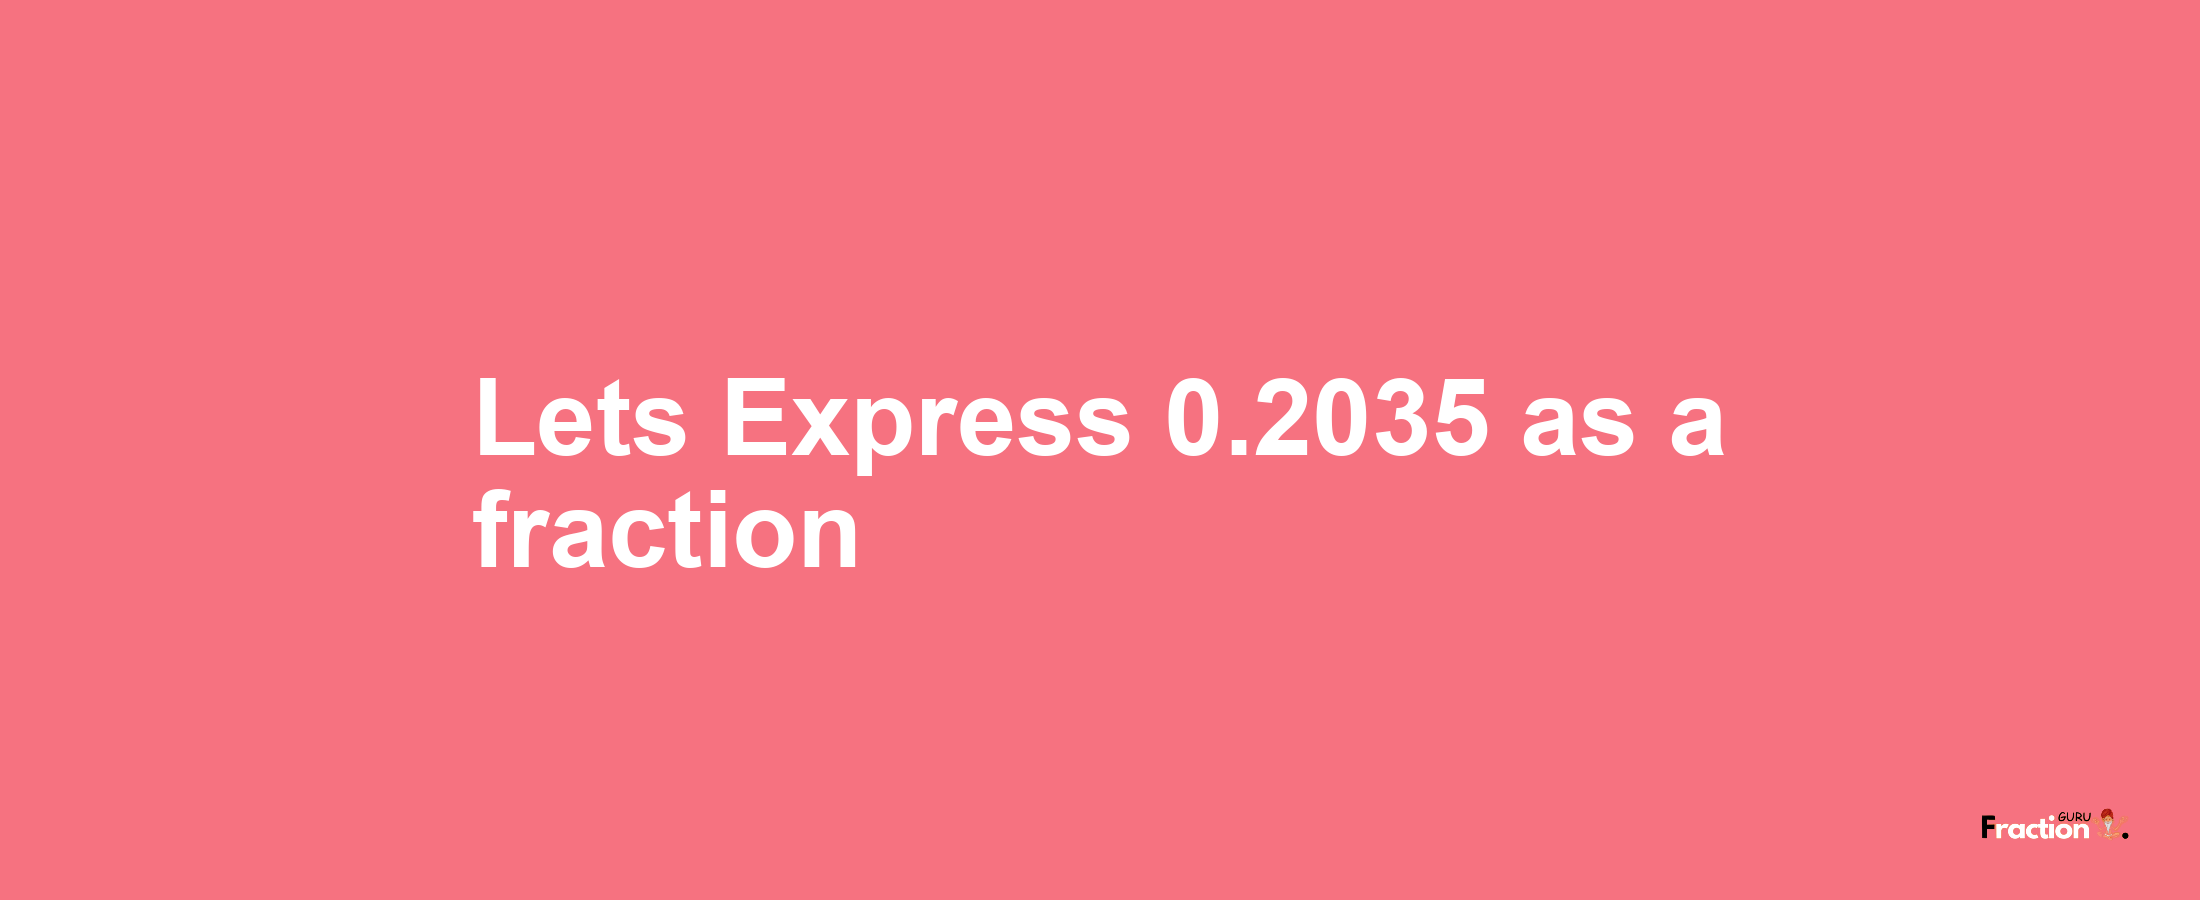 Lets Express 0.2035 as afraction